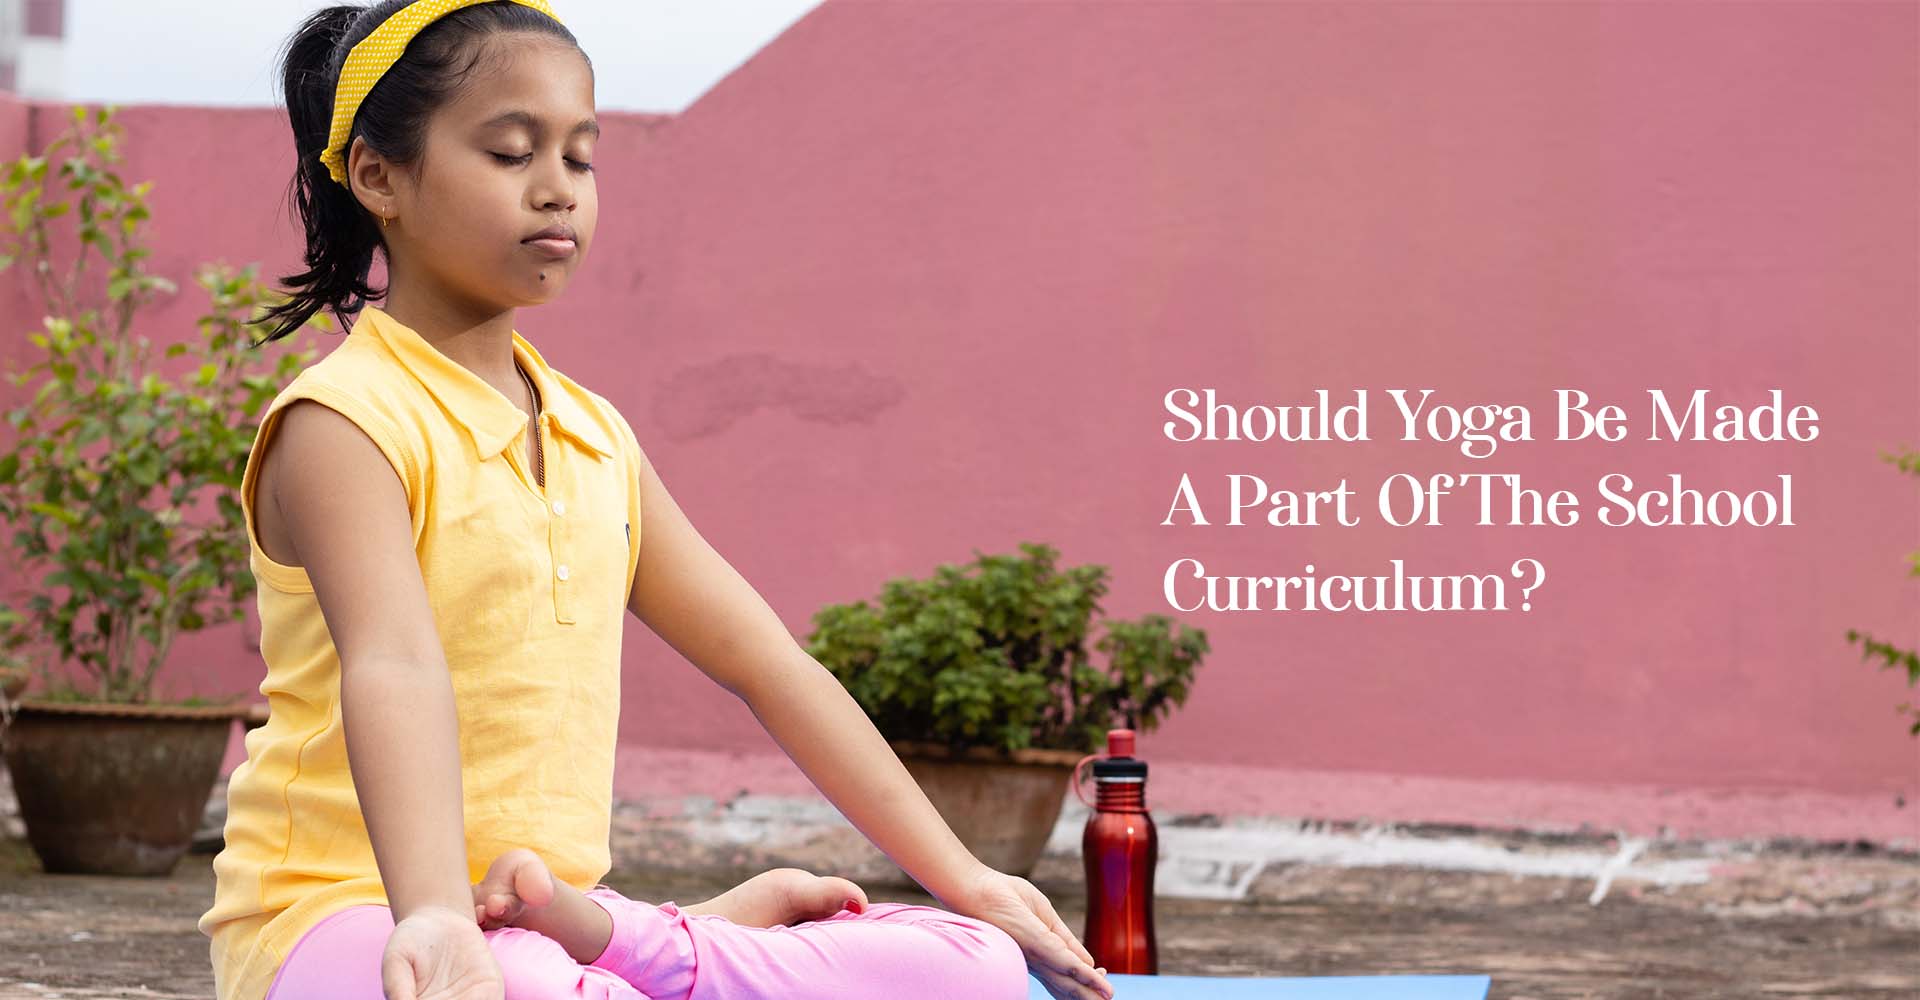 Should Yoga Be Made A Part Of The School Curriculum?